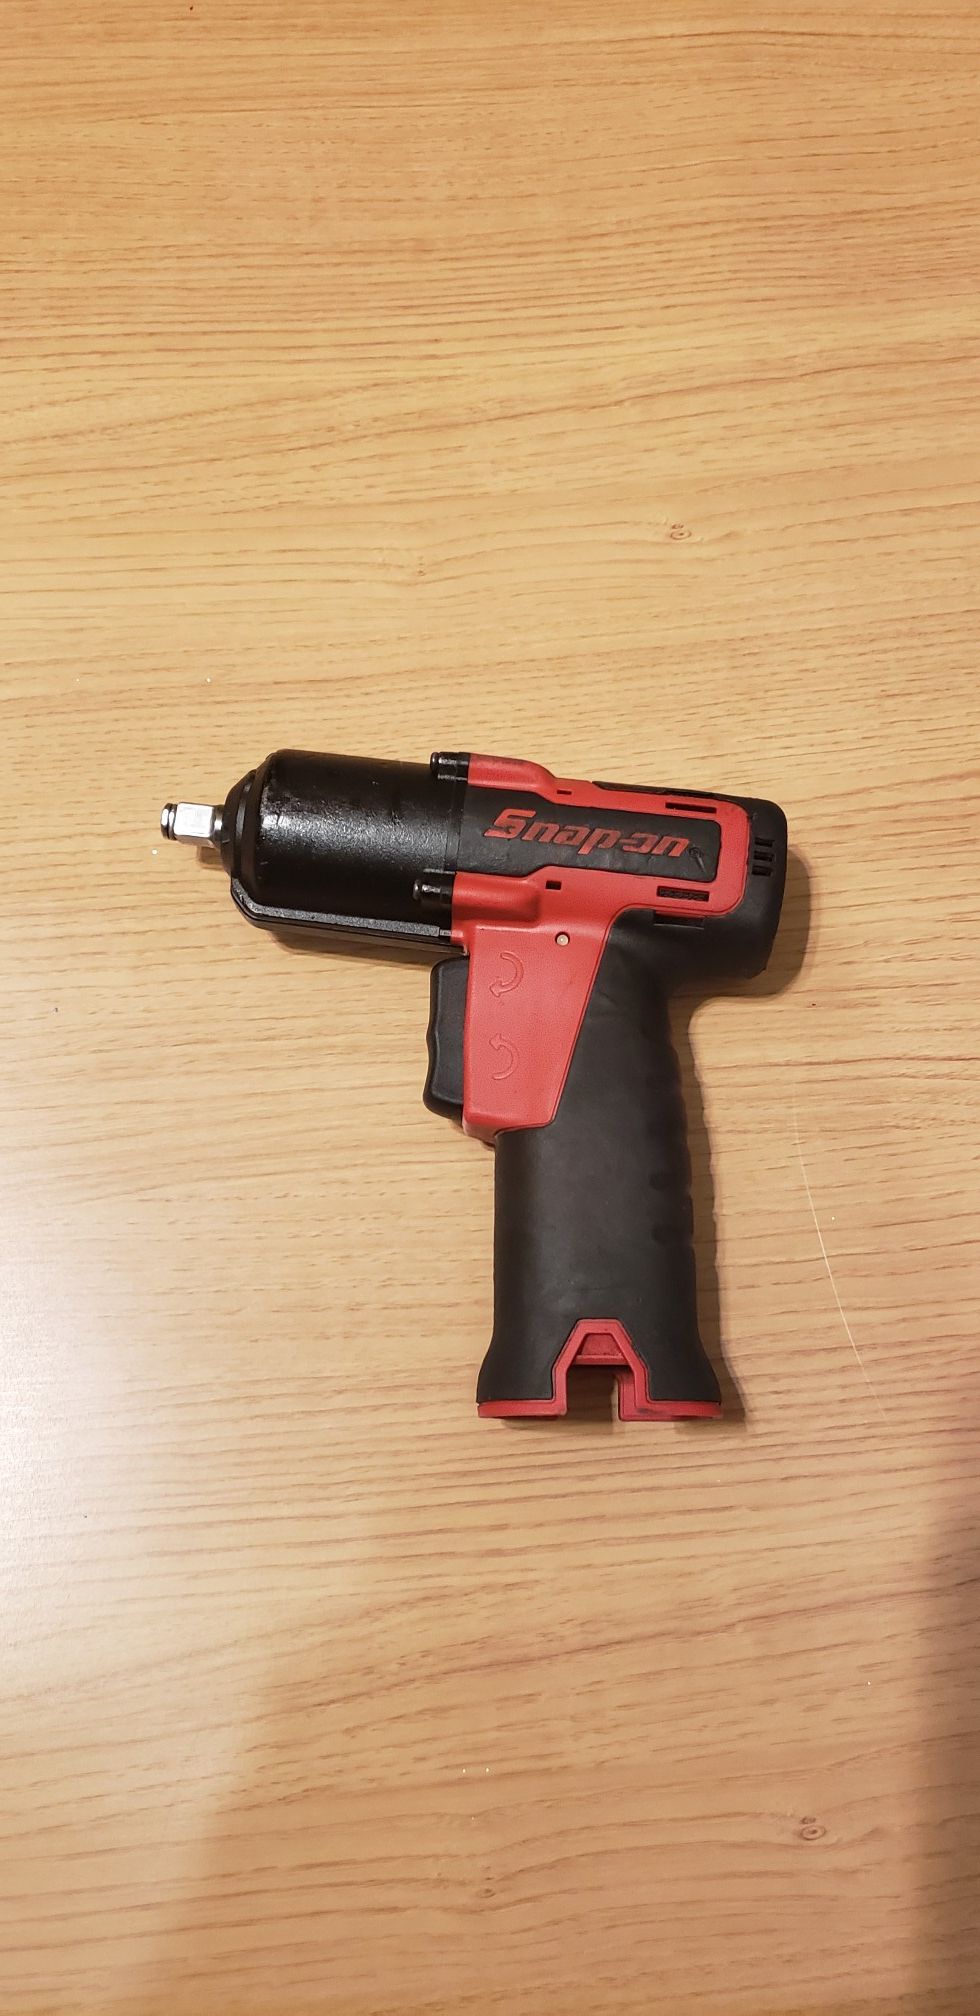 Snap-On 14.4 v 3/8" Drive MicroLithium Cordless impact wrench (tool only)